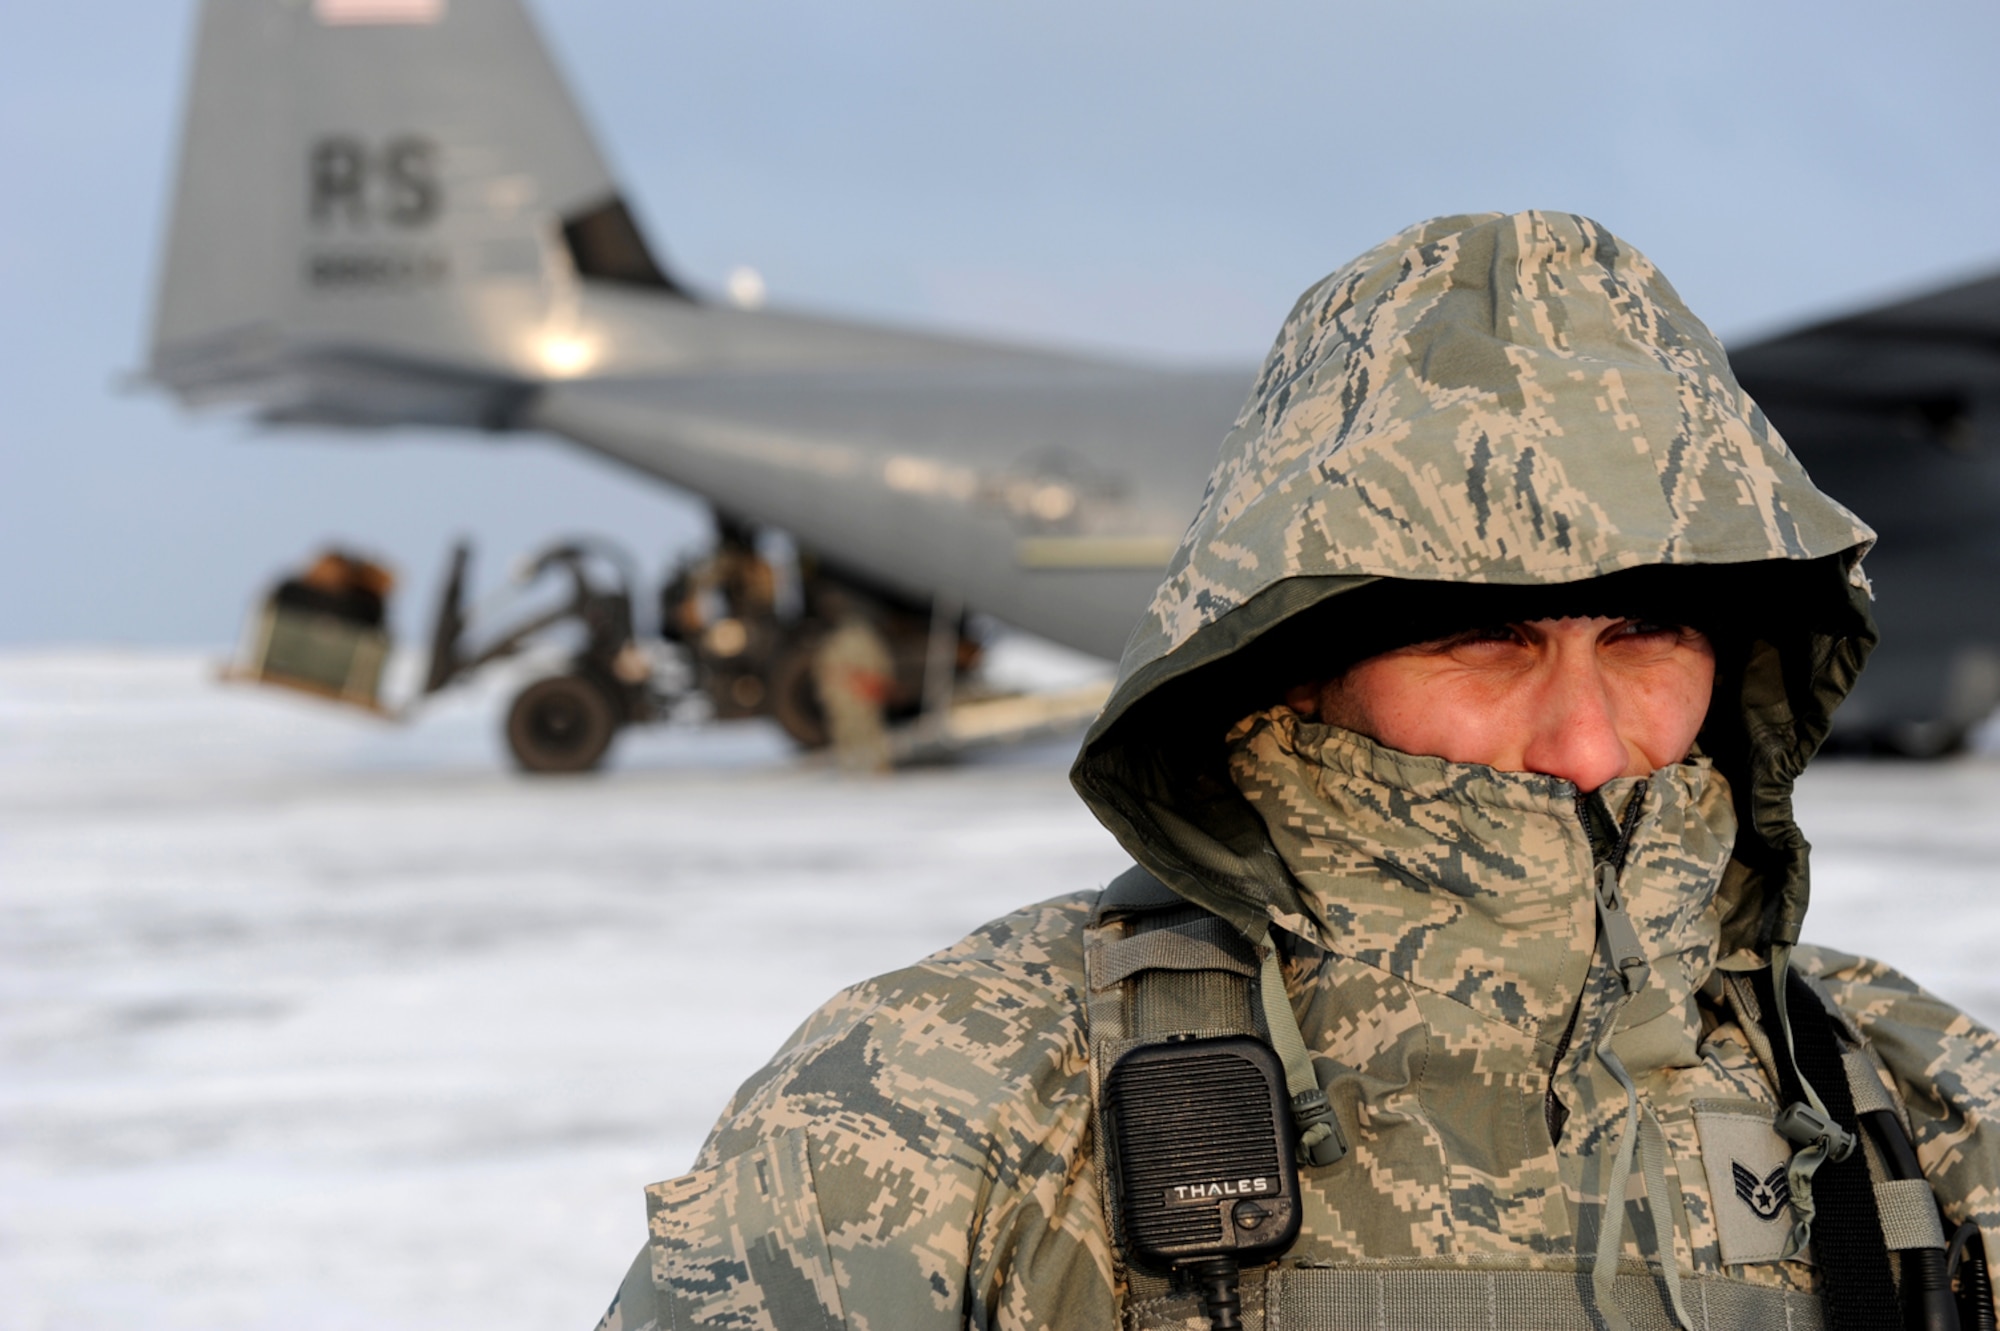 U.S. Air Force Staff Sgt. Joseph Klimaski, 435th Security Forces Squadron, Sembach Annex, Germany, pulls security for a C-130 Hercules out of Ramstein Air Base during cargo off-load at Flugplatz Bitburg, Germany, Jan. 26, 2010, in preparation of Ramstein's operational readiness inspection in September. The units are setting up bare-base operations as part of the dual-wing operational readiness exercise with the 86th Airlift Wing. This is the second of five operational readiness exercises. (U.S. Air Force photo by Staff Sgt. Sarayuth Pinthong)